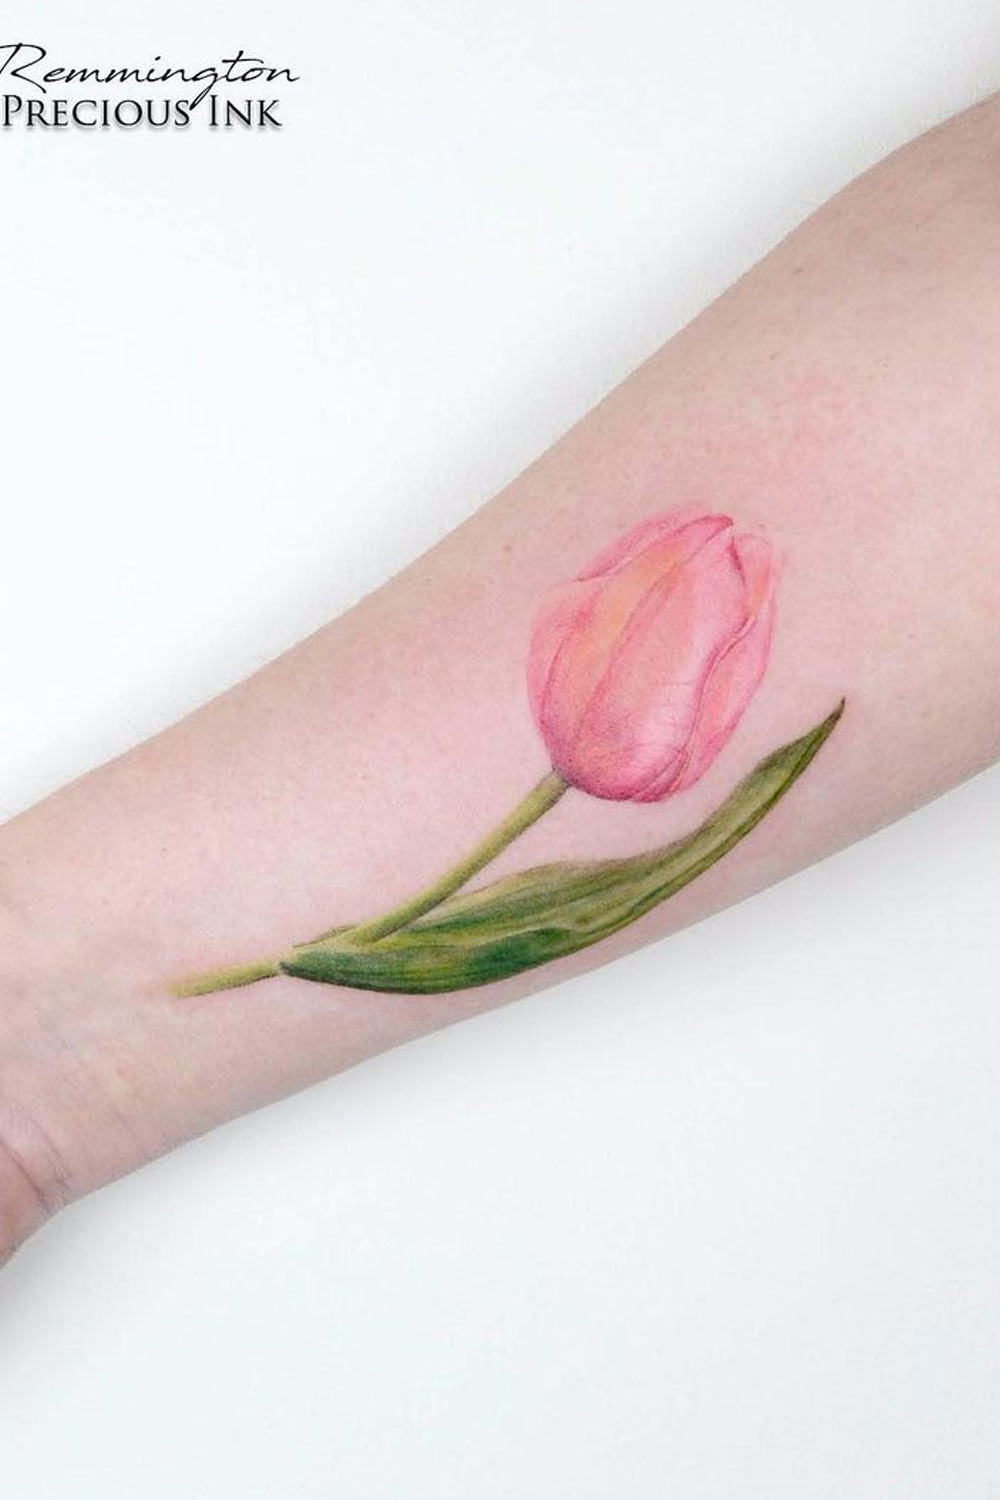 37 Flower Tattoos Designs And Meanings For Your Inspo